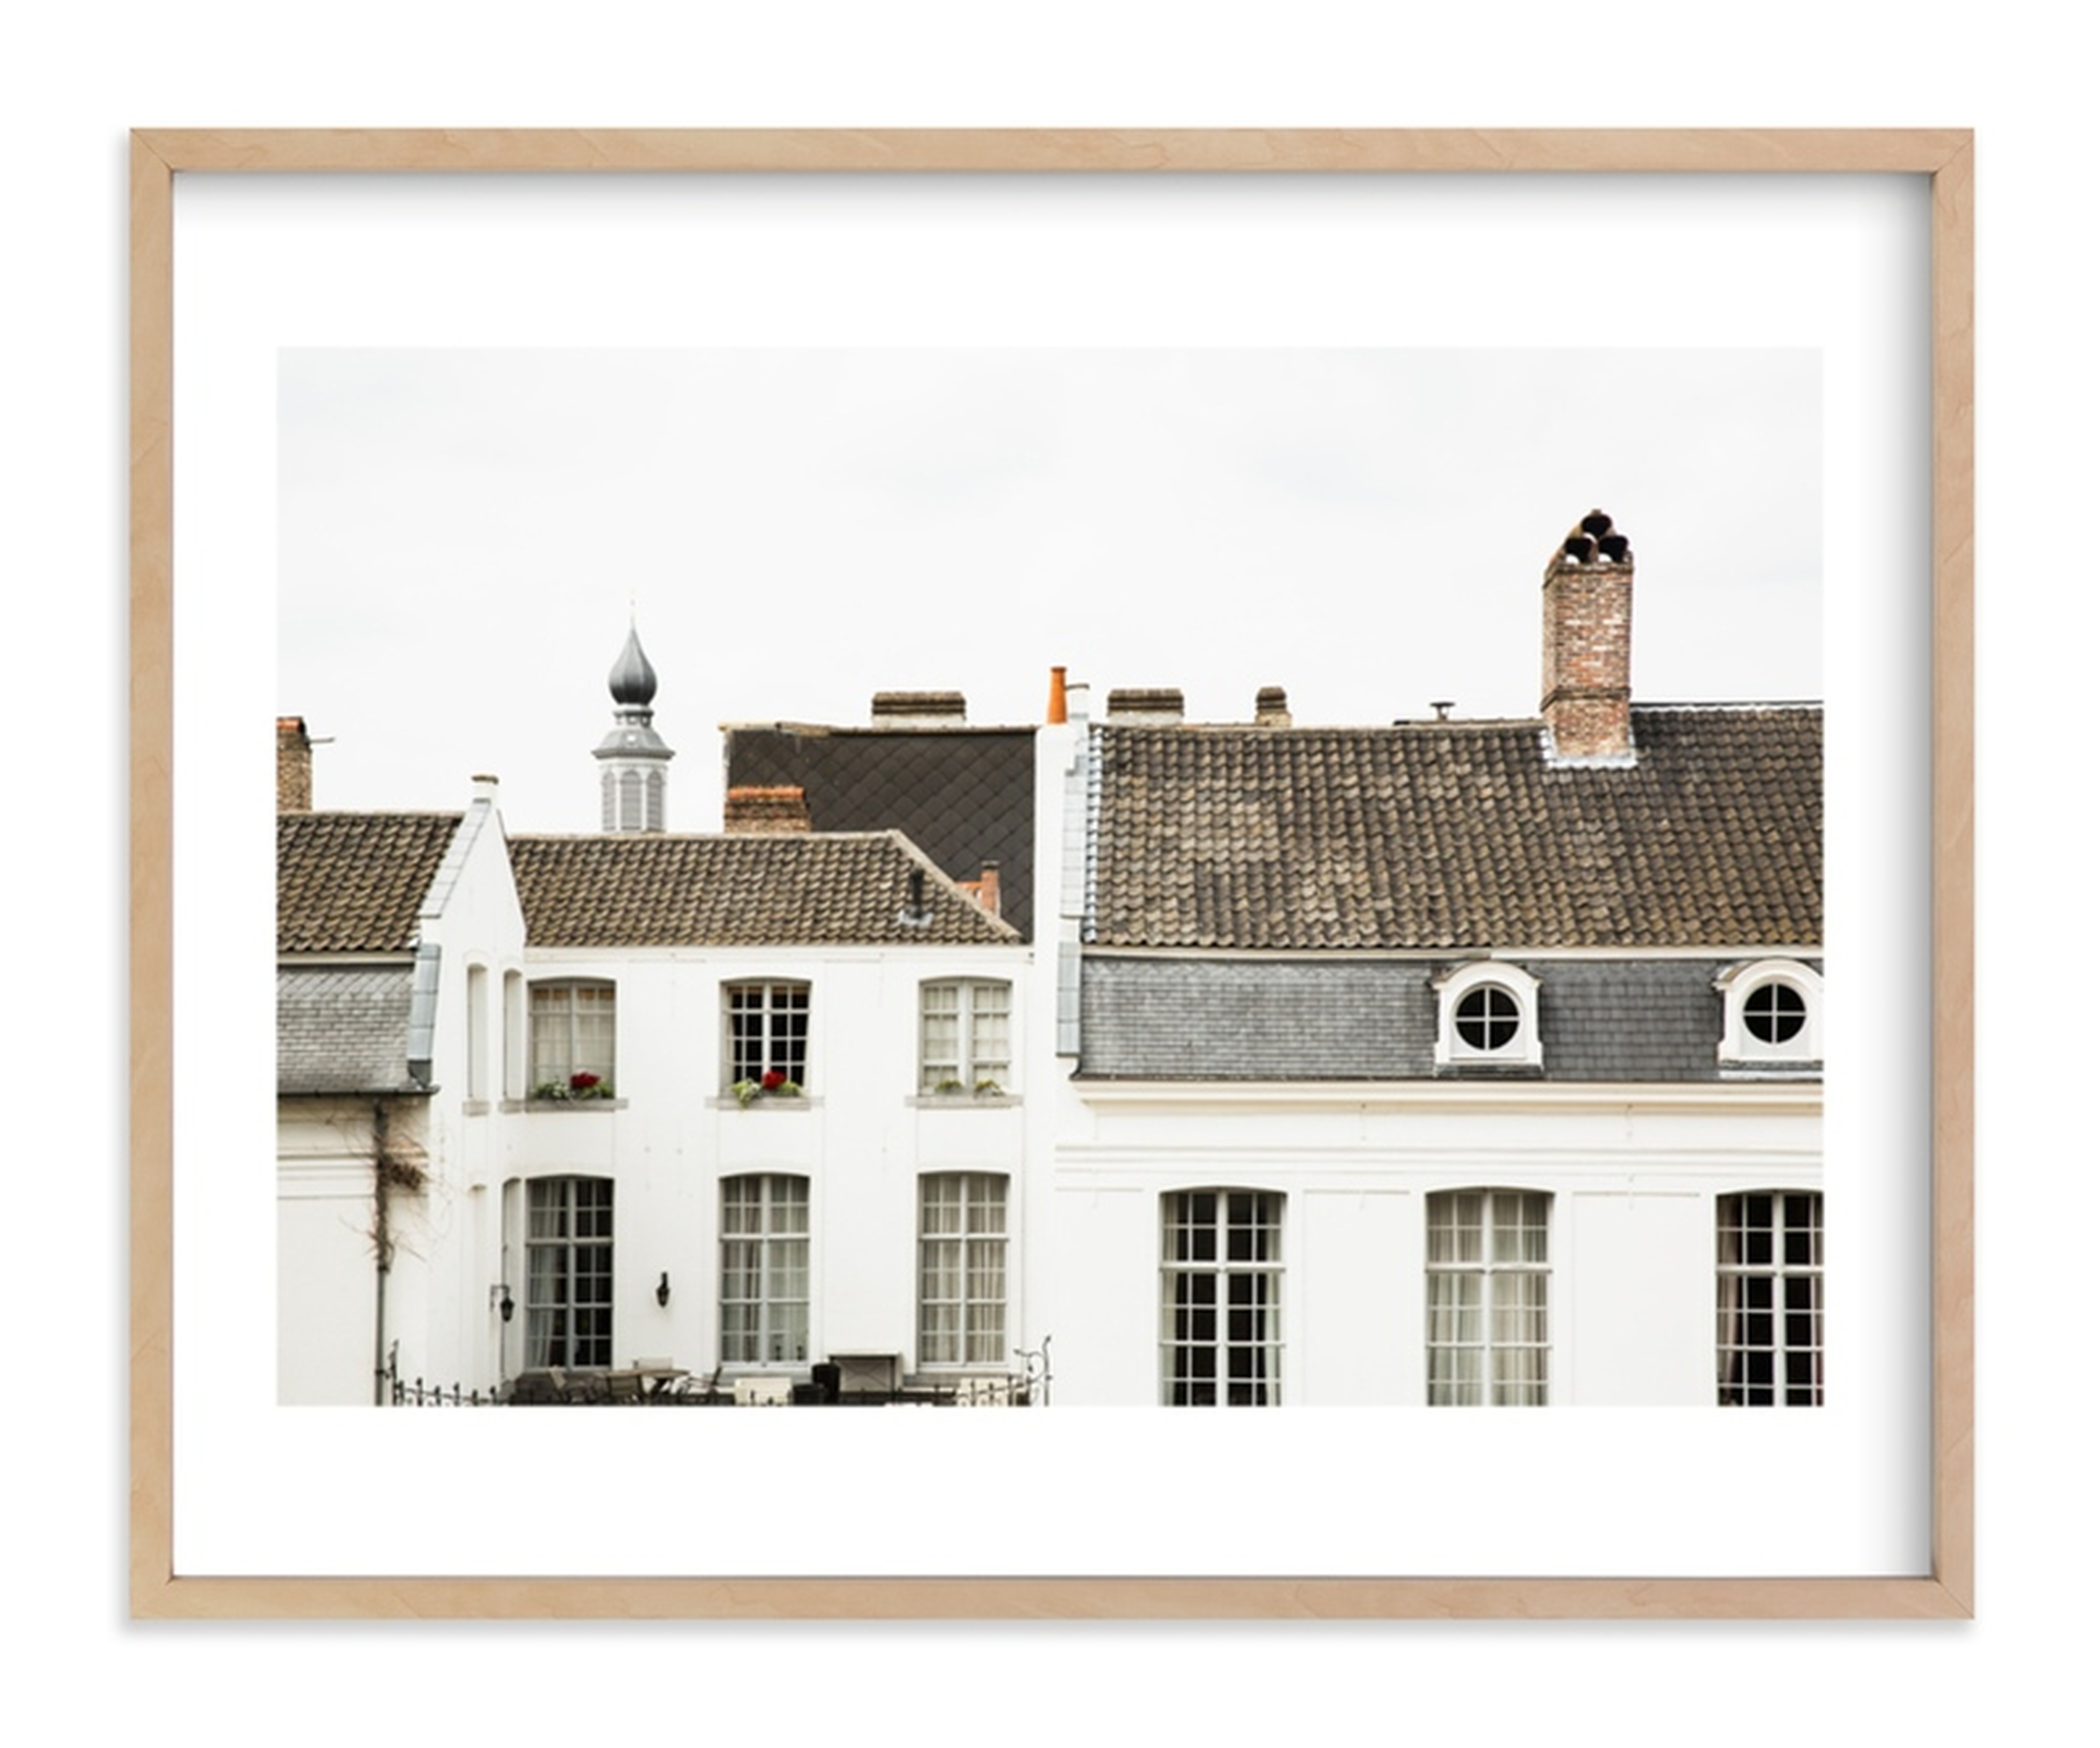 Ghent, 20 x 16 - Minted